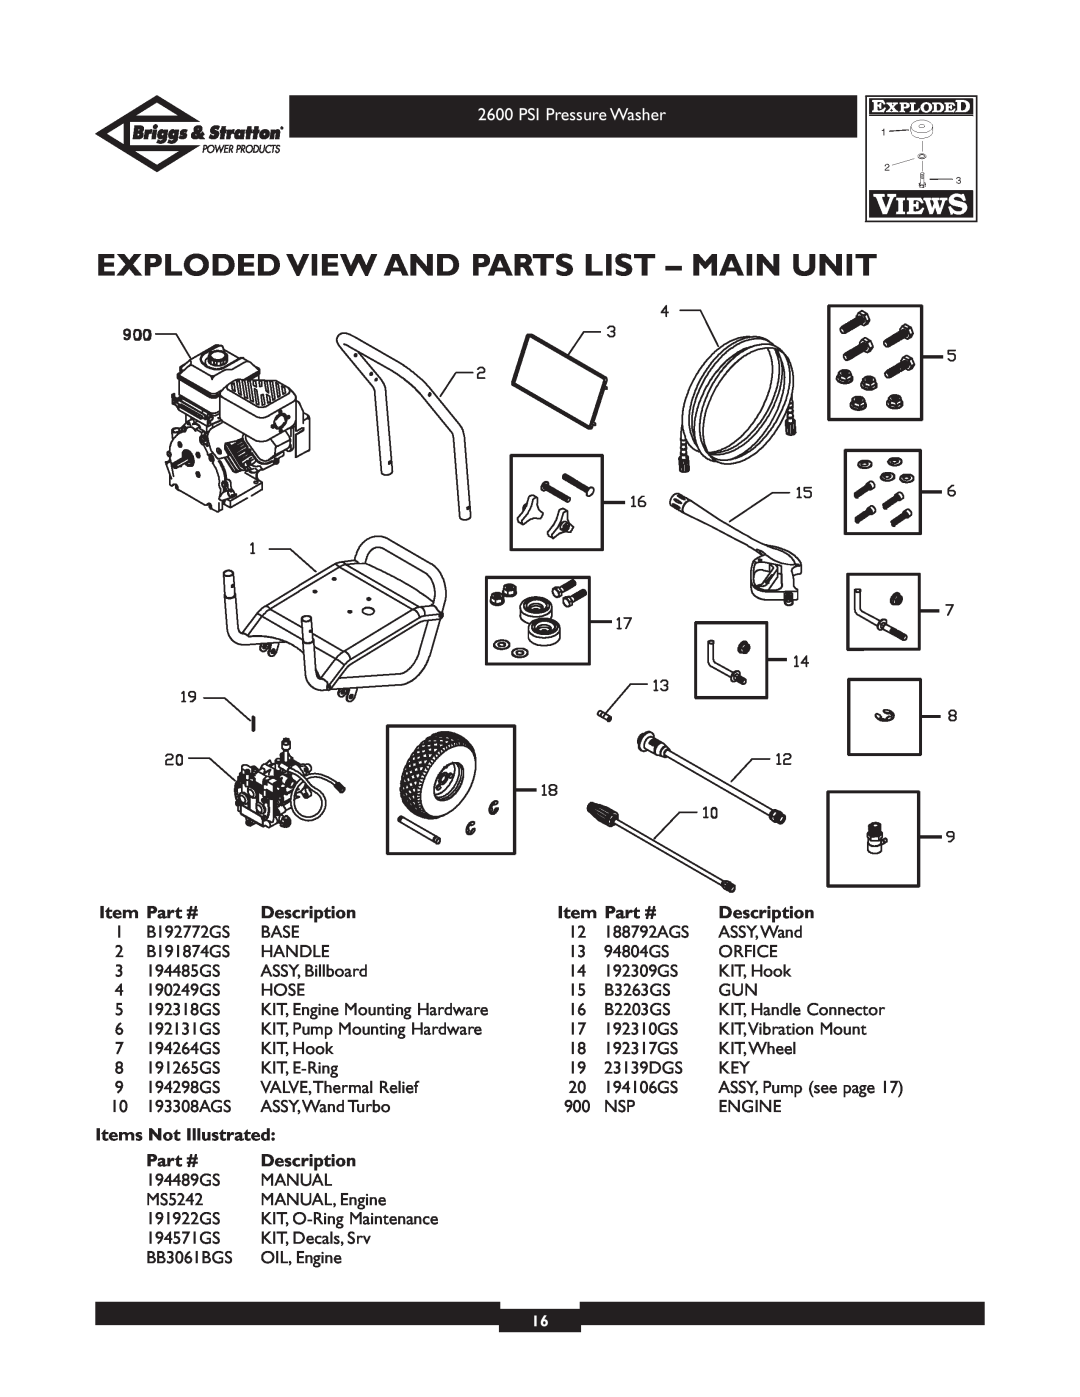 Briggs & Stratton 20216 Exploded View And Parts List - Main Unit, Description, Items Not Illustrated, PSI Pressure Washer 